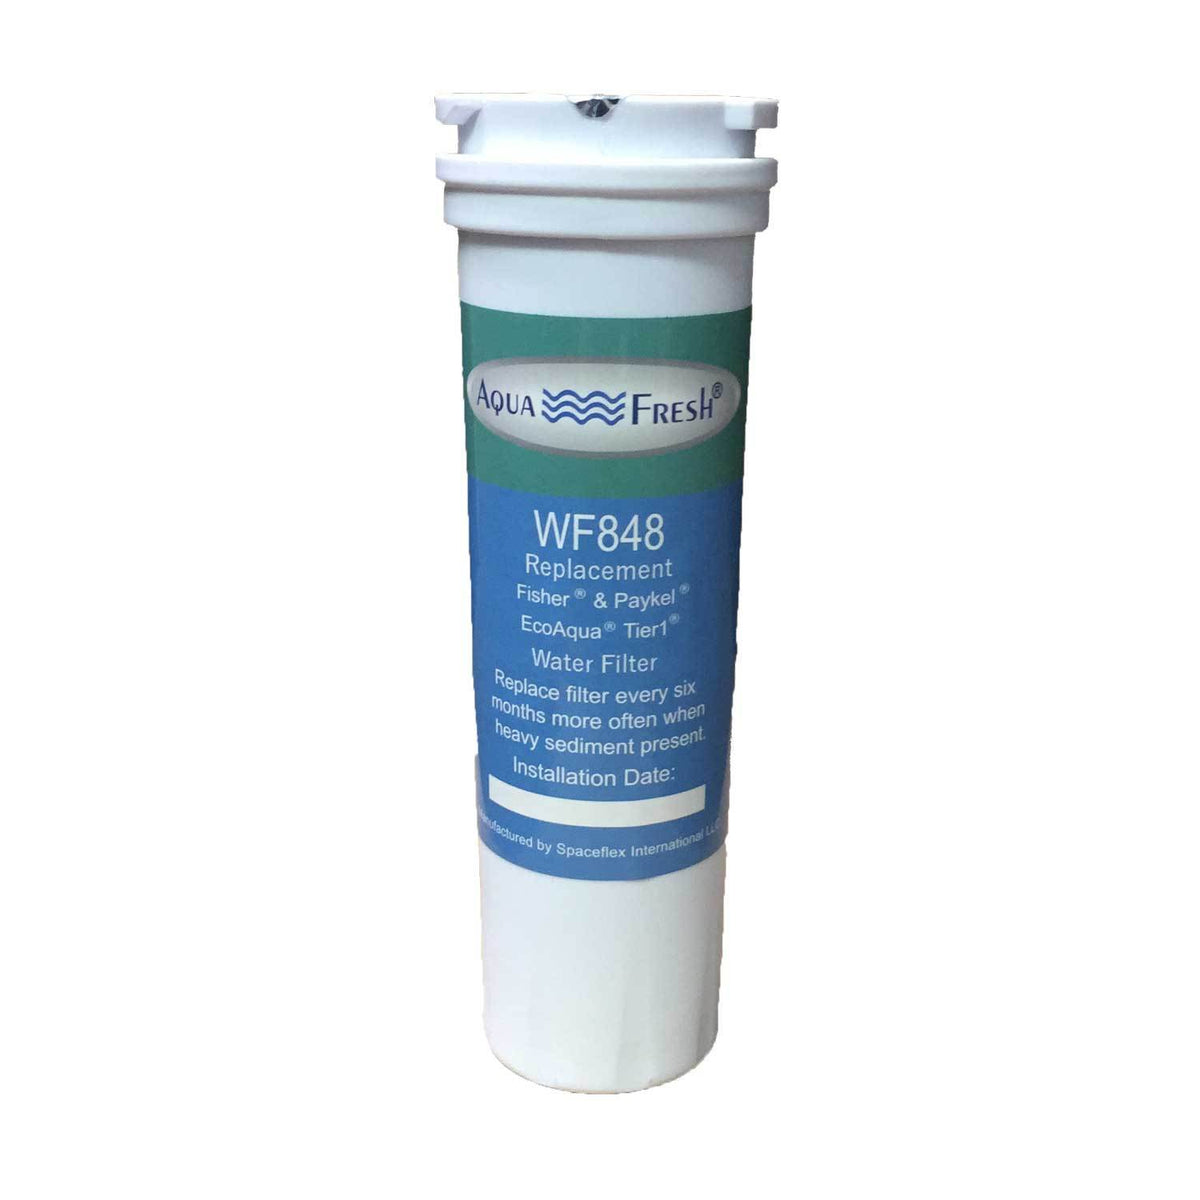 Aqua Fresh WF848 Replacement for Fisher &amp; Paykel 836848 Refrigerator Water Filter